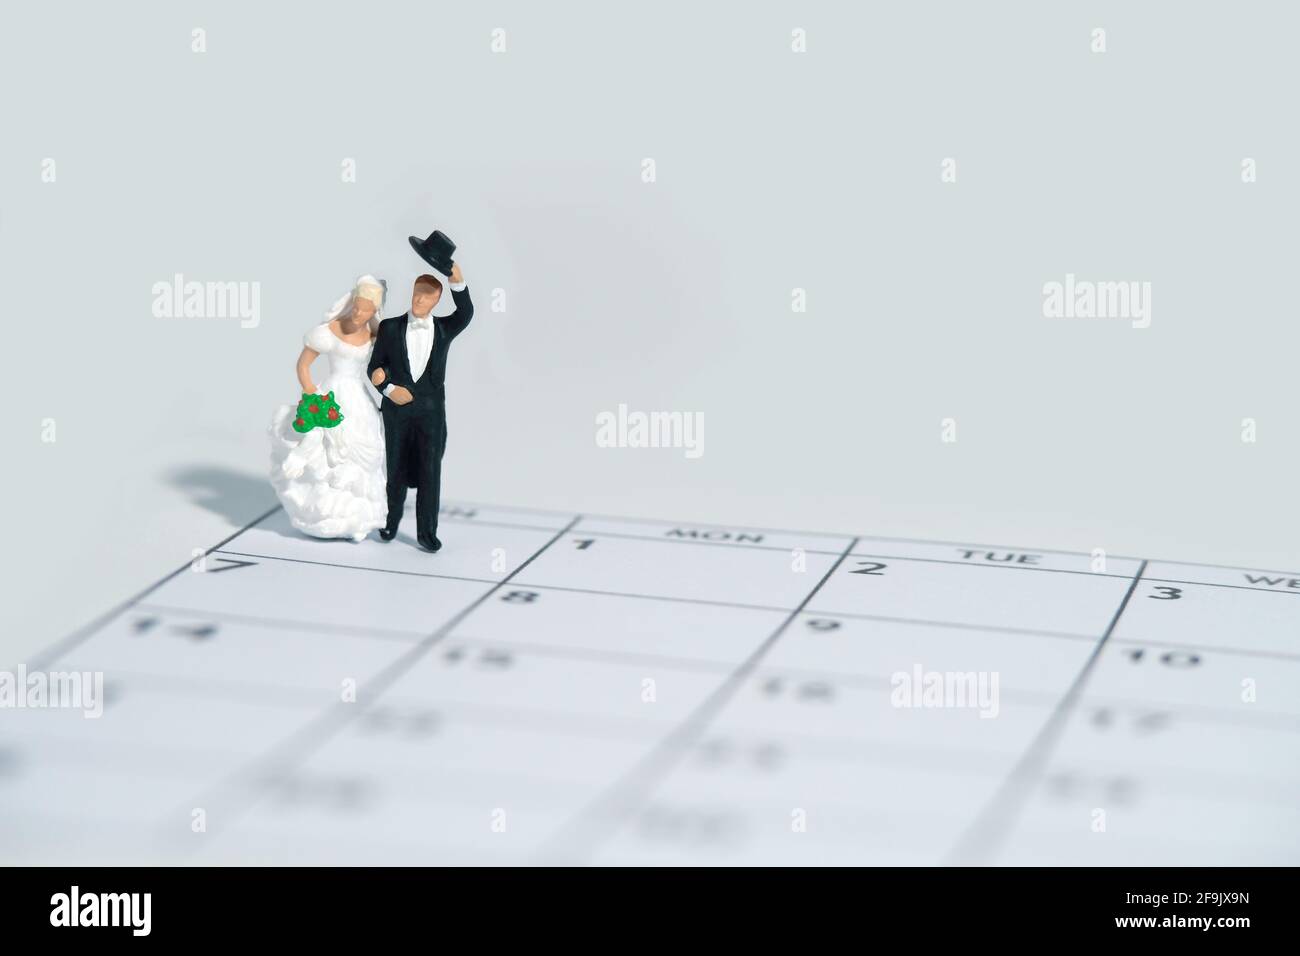 Wedding marriage day, schedule date celebration concept miniature people toy photography. Bride and groom standing above calendar. Image photo Stock Photo